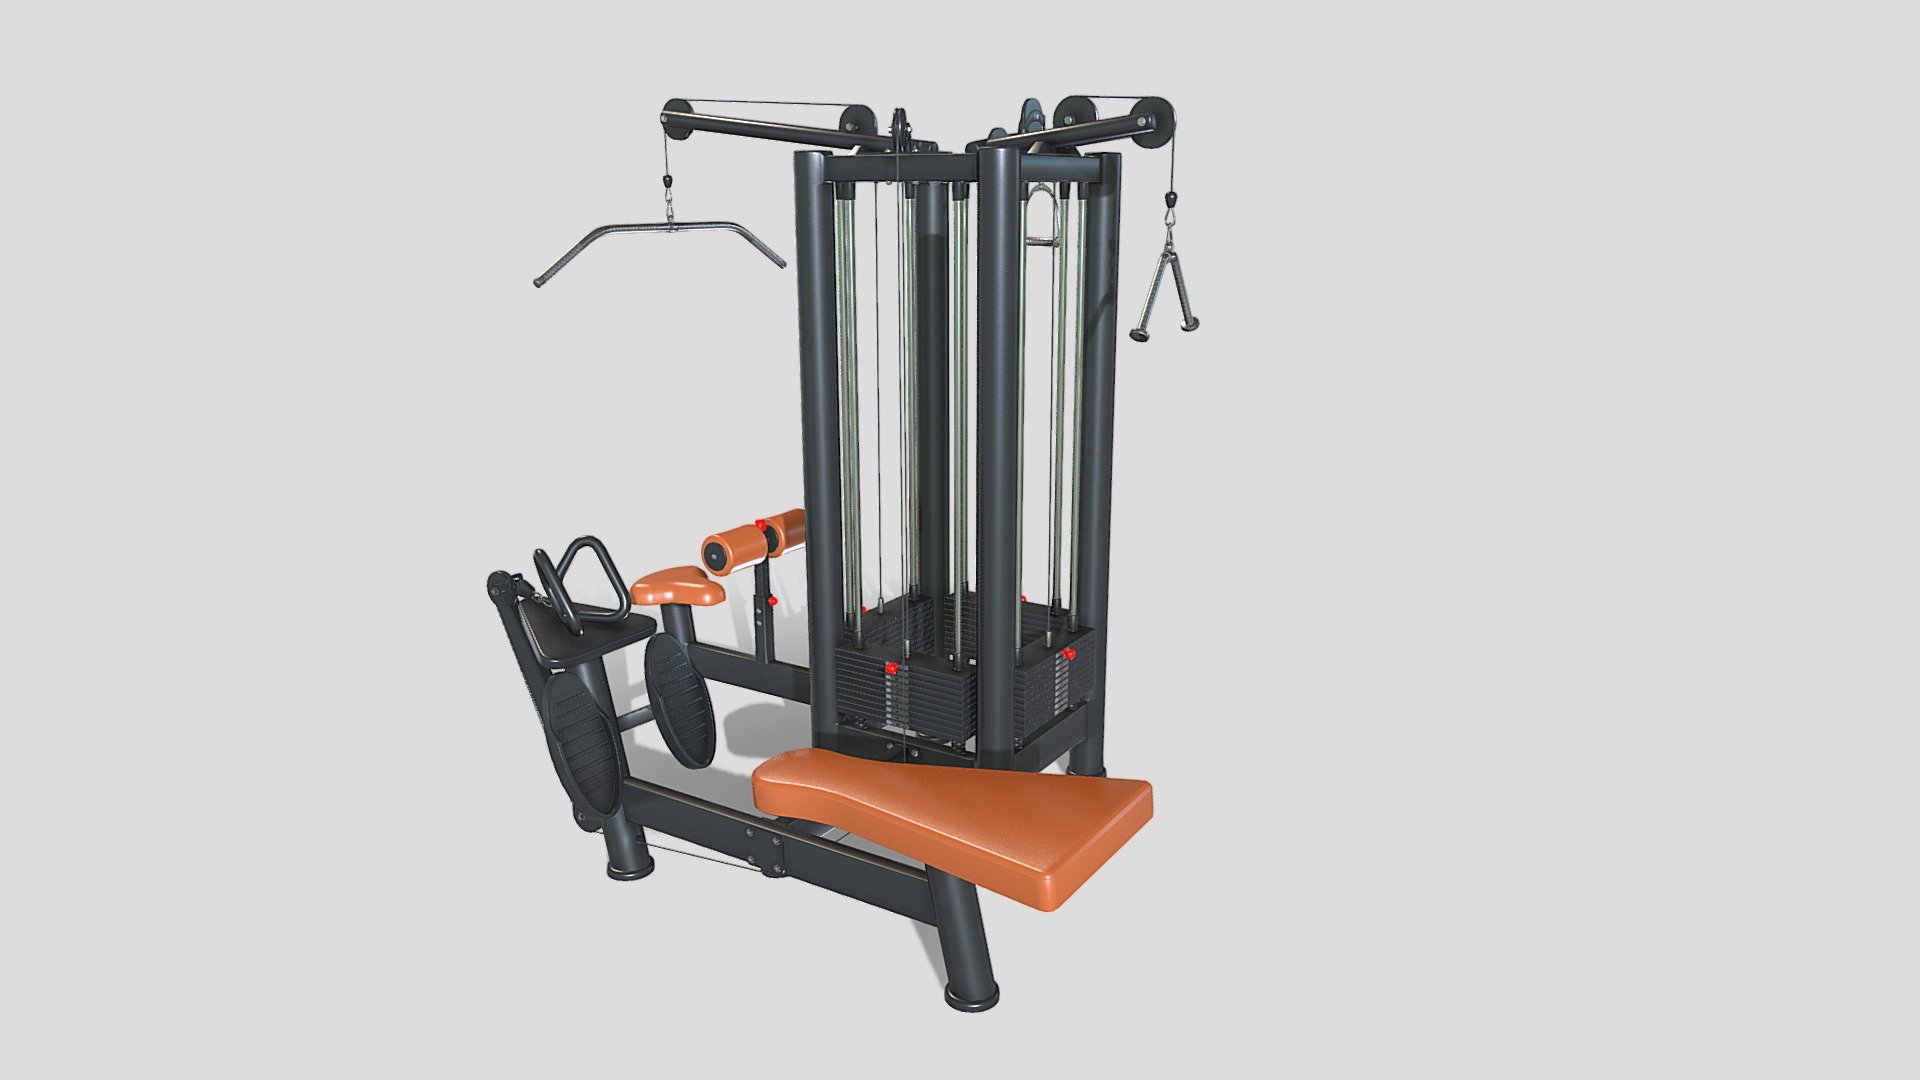 Gym machine 3d model built to real size, rendered with Cycles in Blender, as per seen on attached images. 

File formats:
-.blend, rendered with cycles, as seen in the images;
-.obj, with materials applied;
-.dae, with materials applied;
-.fbx, with materials applied;
-.stl;

Files come named appropriately and split by file format.

3D Software:
The 3D model was originally created in Blender 3.1 and rendered with Cycles.

Materials and textures:
The models have materials applied in all formats, and are ready to import and render.
Materials are image based using PBR, the model comes with five 4k png image textures.
Preview scenes:
The preview images are rendered in Blender using its built-in render engine &lsquo;Cycles'.
Note that the blend files come directly with the rendering scene included and the render command will generate the exact result as seen in previews.

General:
The models are built mostly out of quads.

For any problems please feel free to contact me.

Don't forget to rate and enjoy! - 4 Multi Station Jungle Machine V1 - Buy Royalty Free 3D model by dragosburian 3d model